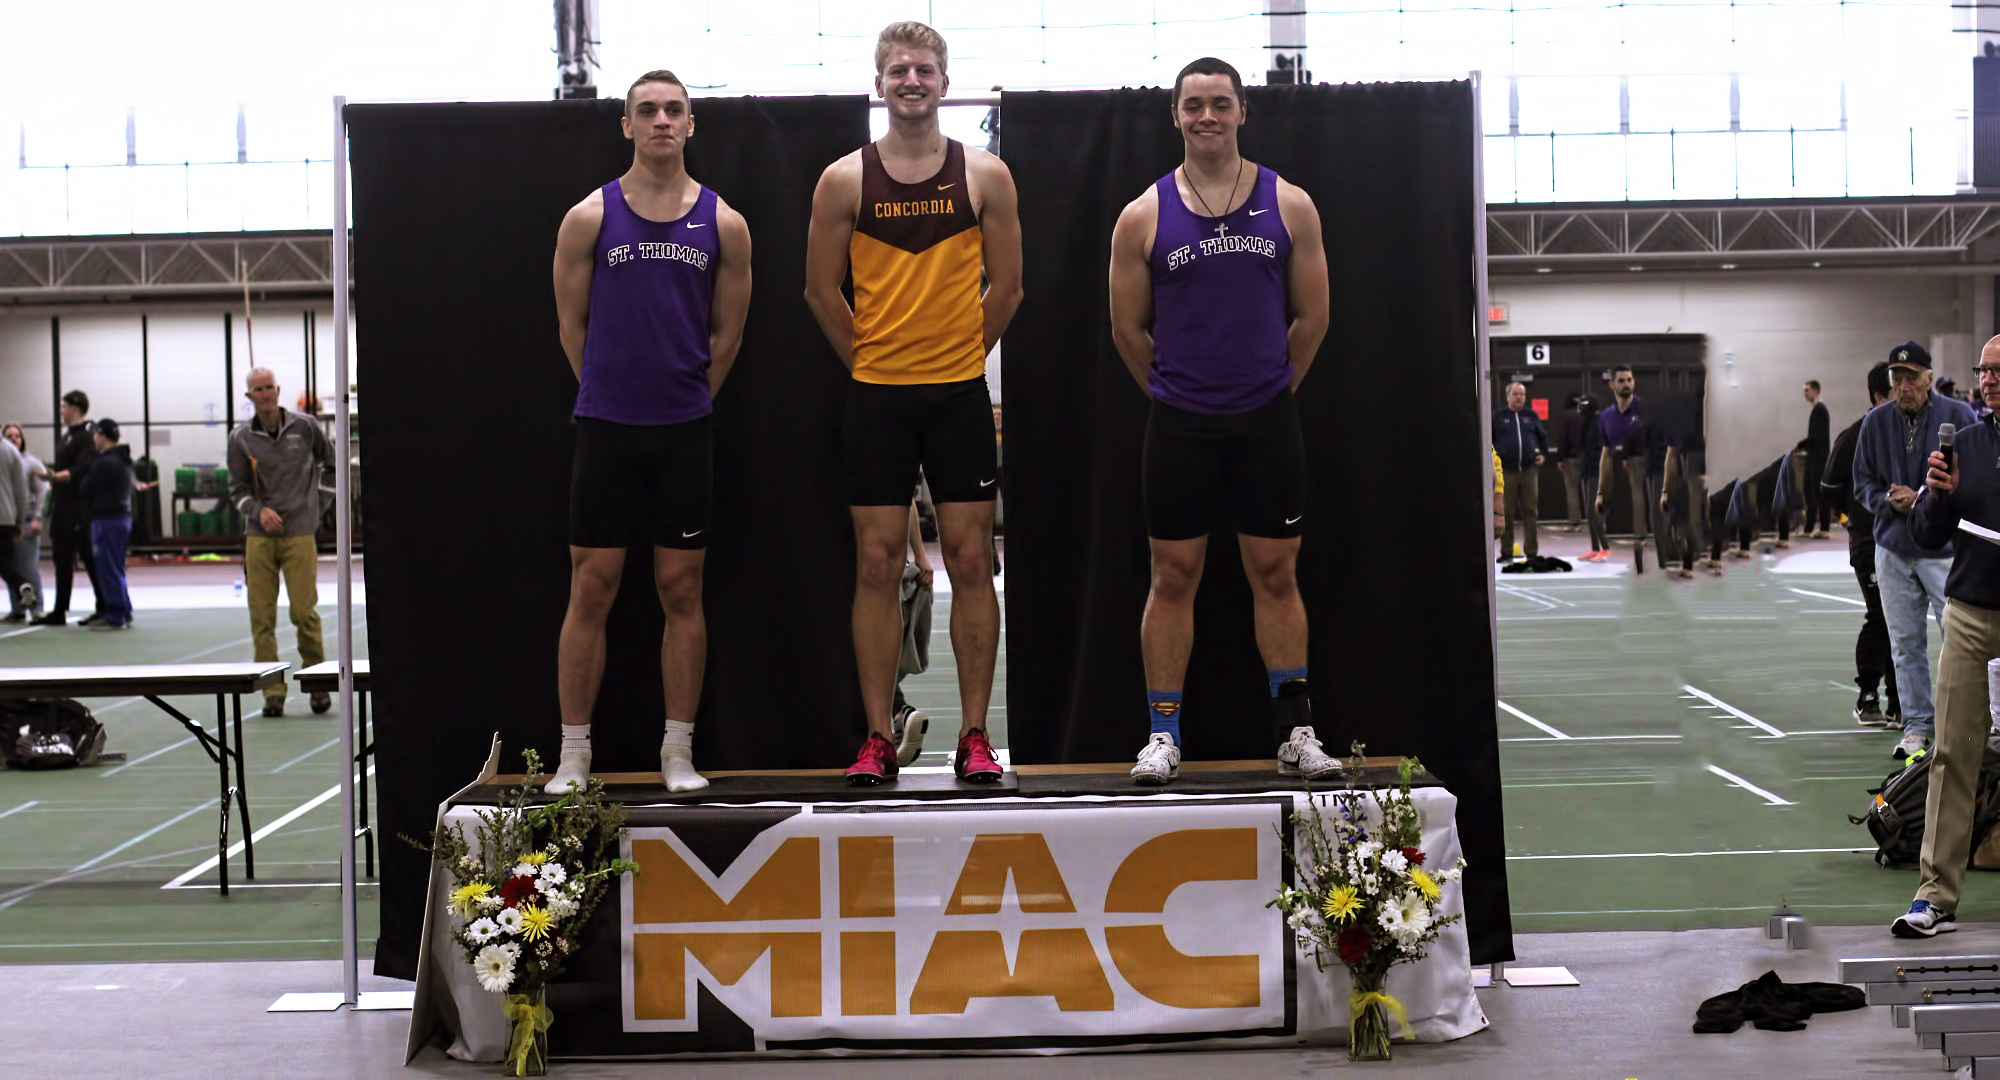 Matt Bye stands atop the podium after winning the heptathlon at the MIAC Championship Meet. (Pic courtesy of the St. Olaf Sports Information Office)